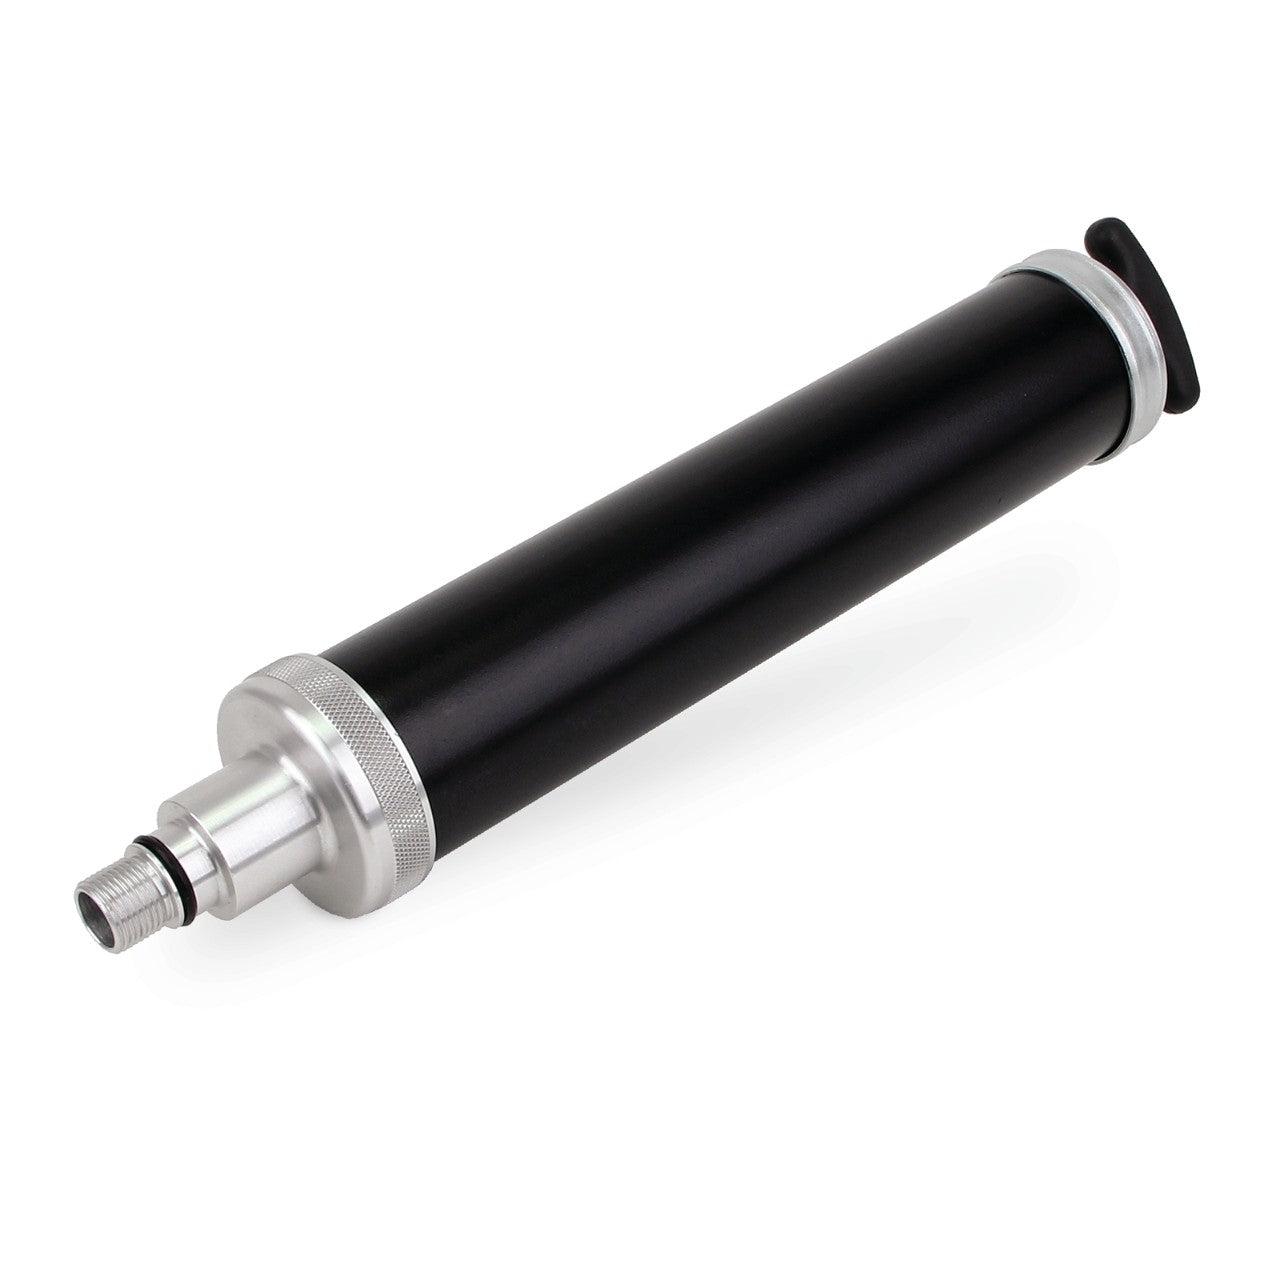 G-Series Pump Accessories - Manual Hand Pump for Use with Grease Cartridges